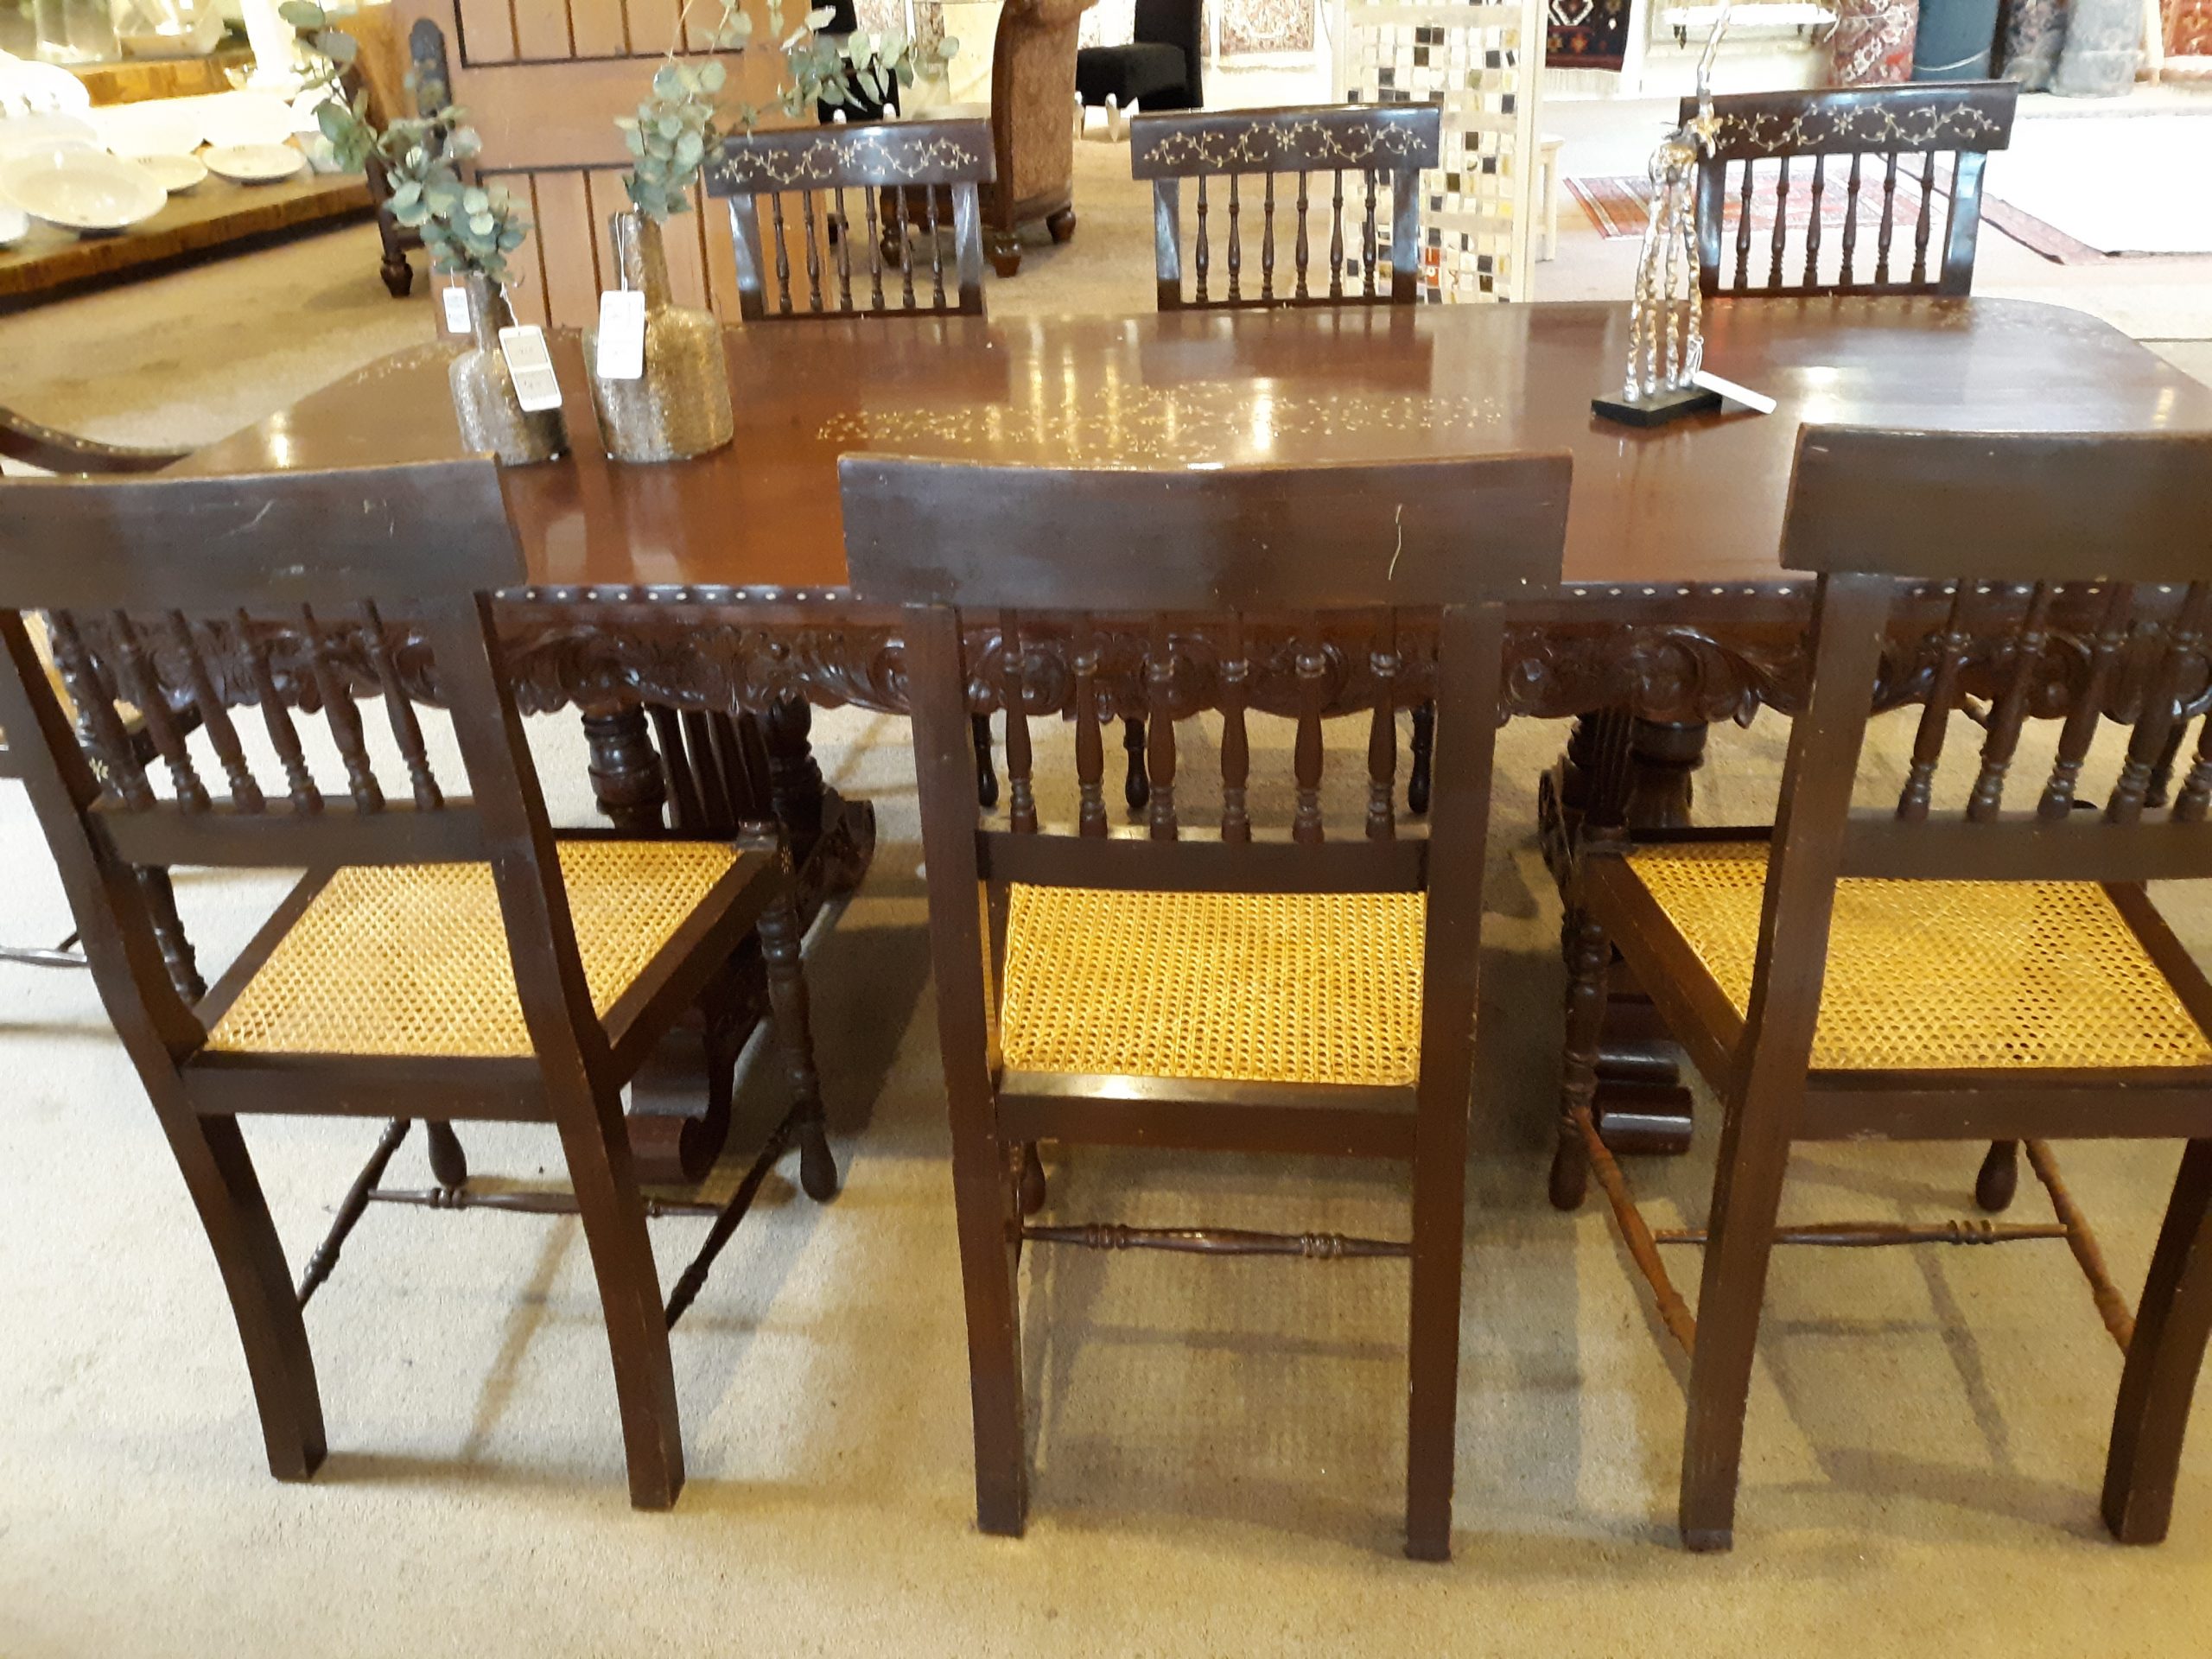 Dining Room Table With Chairs inside sizing 4128 X 3096